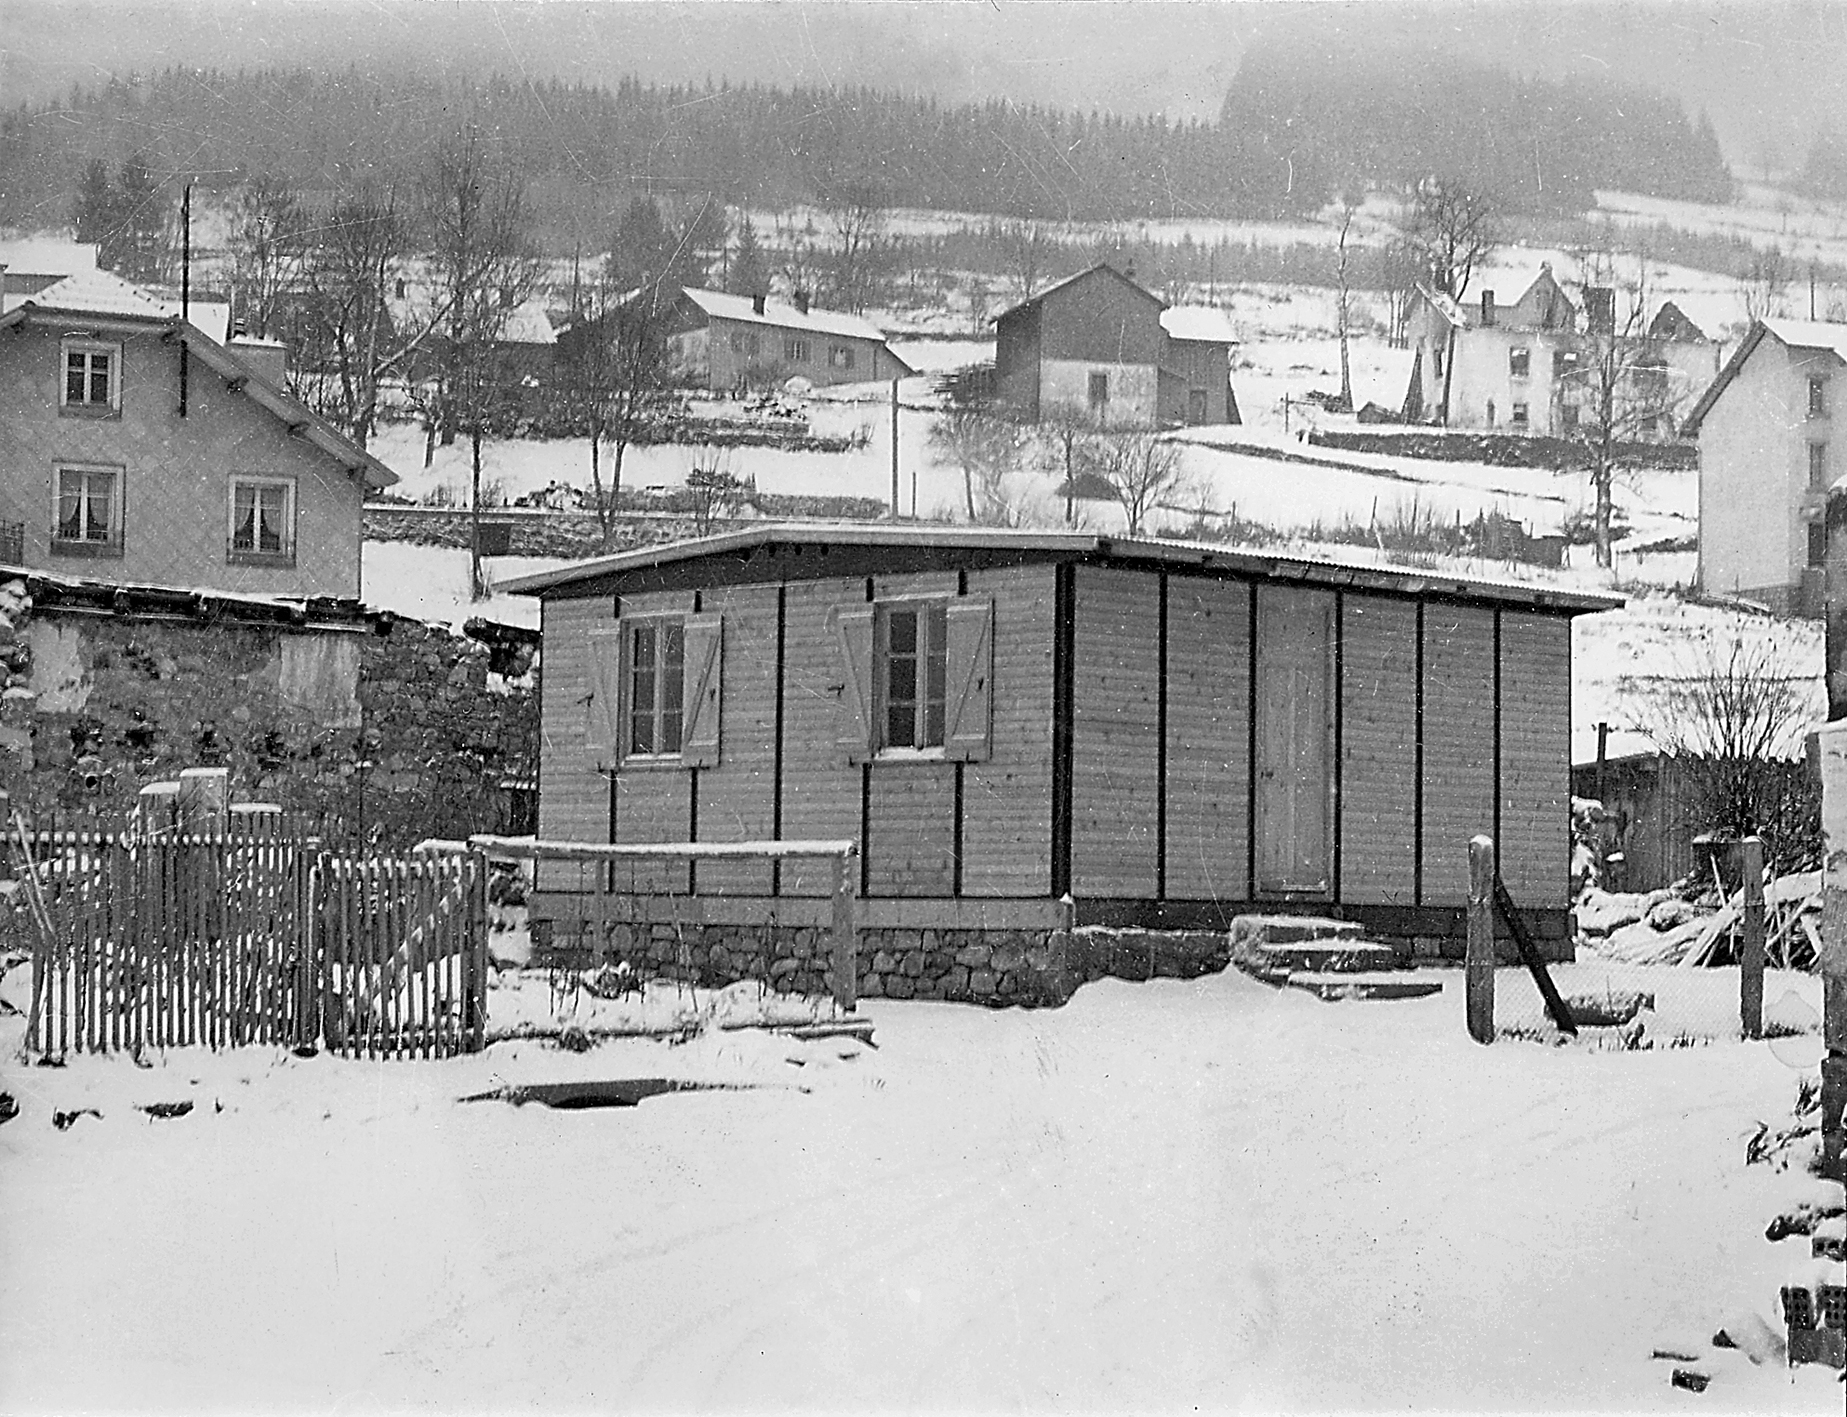 6x6 Demountable house, location unknown, ca. 1945.